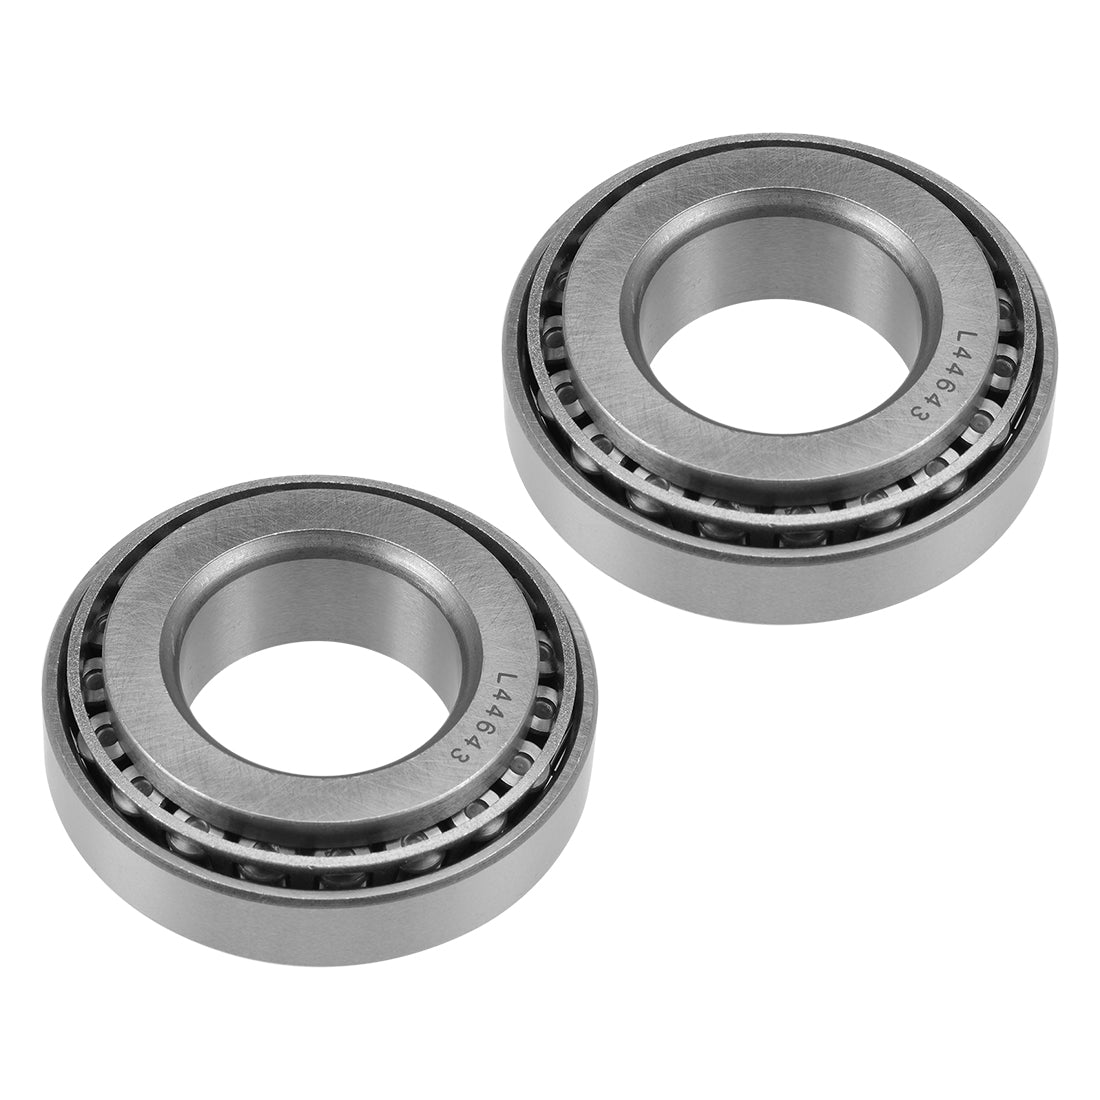 Uxcell Uxcell L44649/L44610 Tapered Roller Bearing Cone and Cup Set 1.0625" Bore 1.98" OD 2pcs